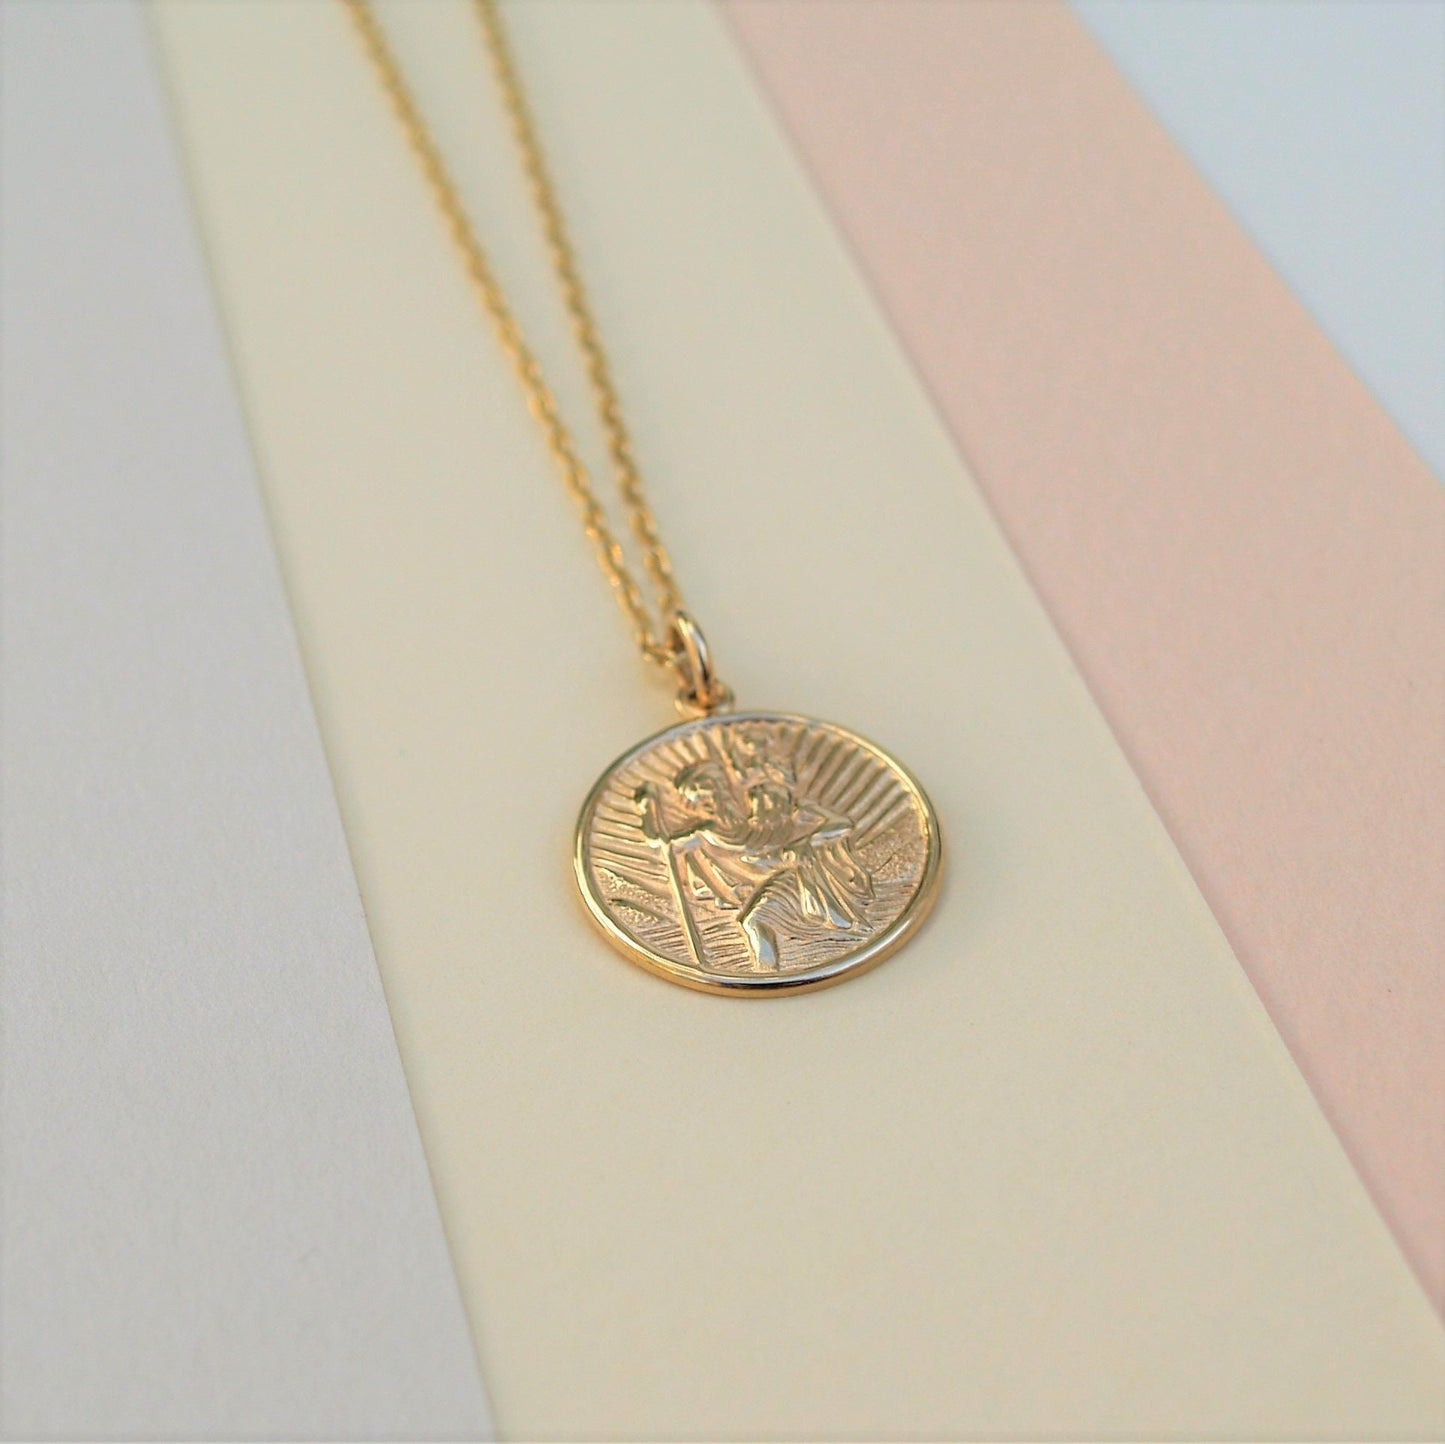 9ct solid yellow gold Saint Christopher pendant on a 1.1mm wide diamond cut trace chain